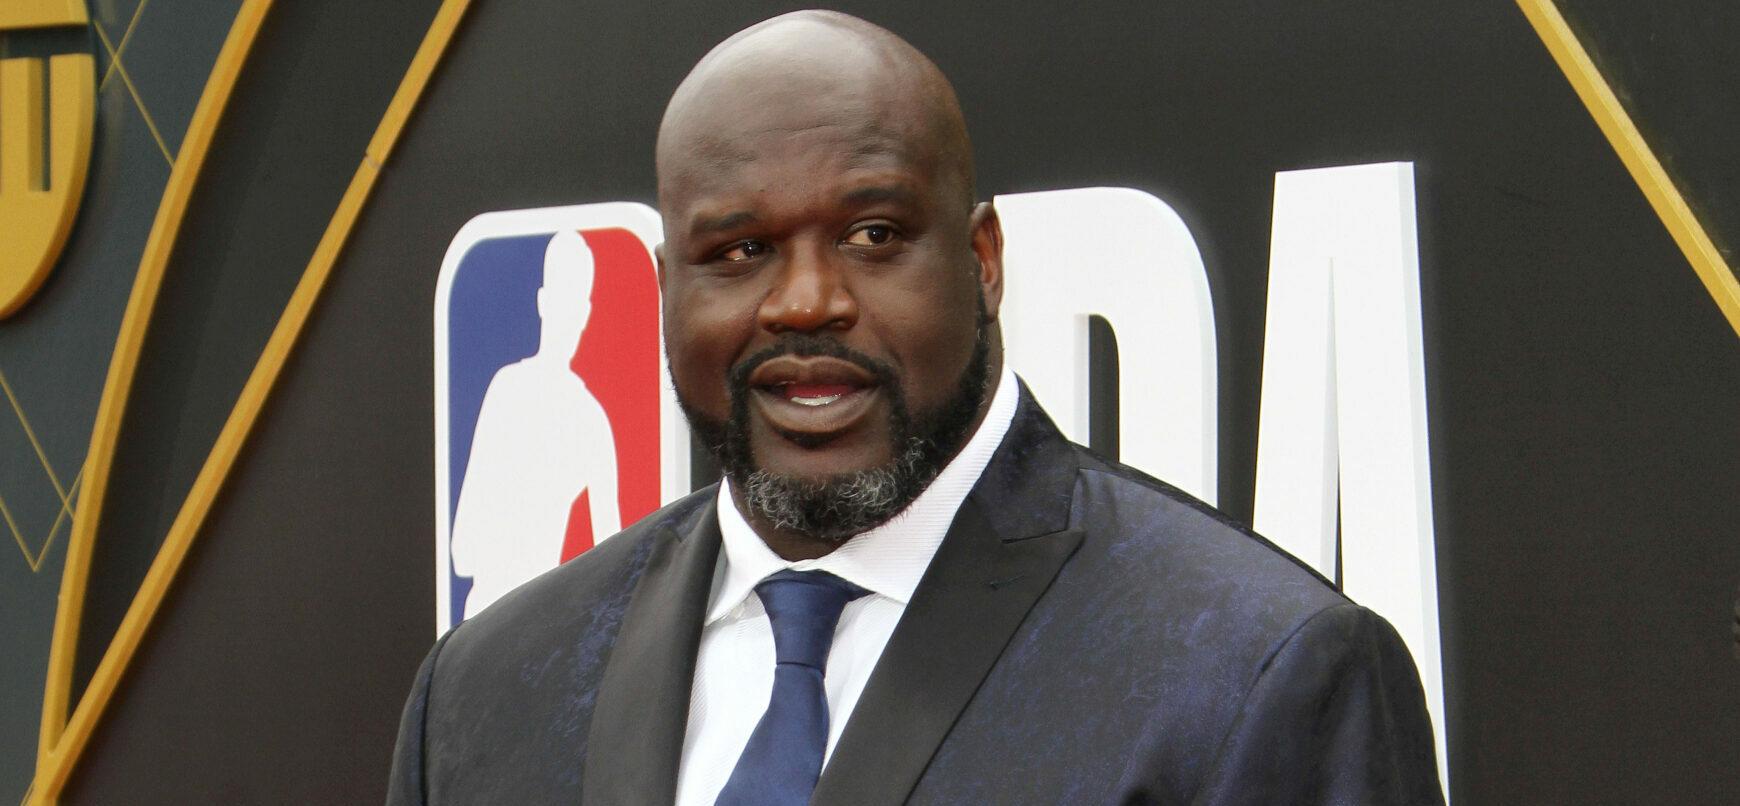 Shaq Had Some Fun In Home Depot After DMing Viral ‘Home Depot Girl’